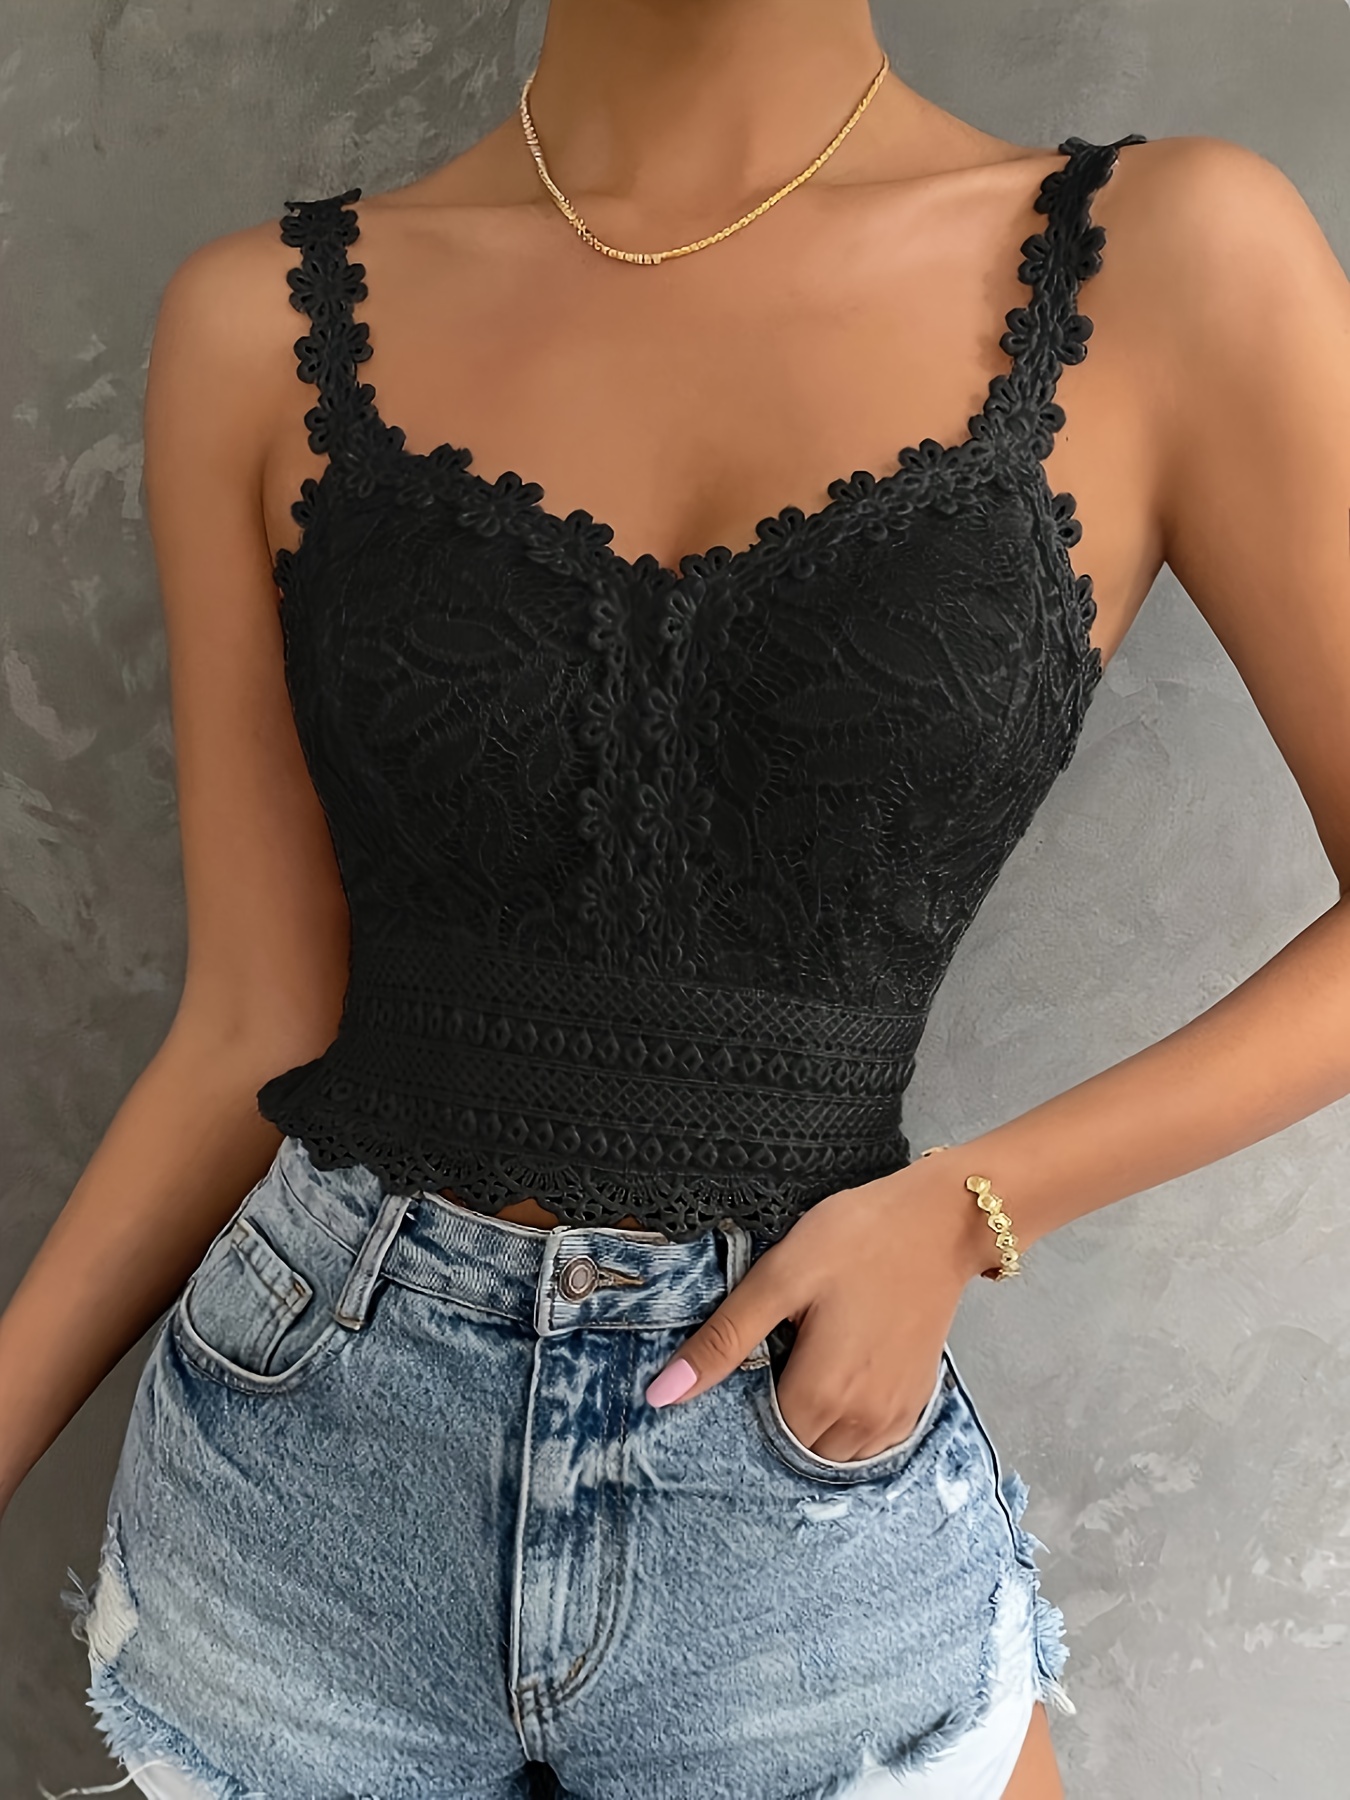 Floral Lace Spaghetti Strap Crop Tops for Women Summer Sleeveless Sexy Cami  Tank Top V Neck Bralette, Black, Small